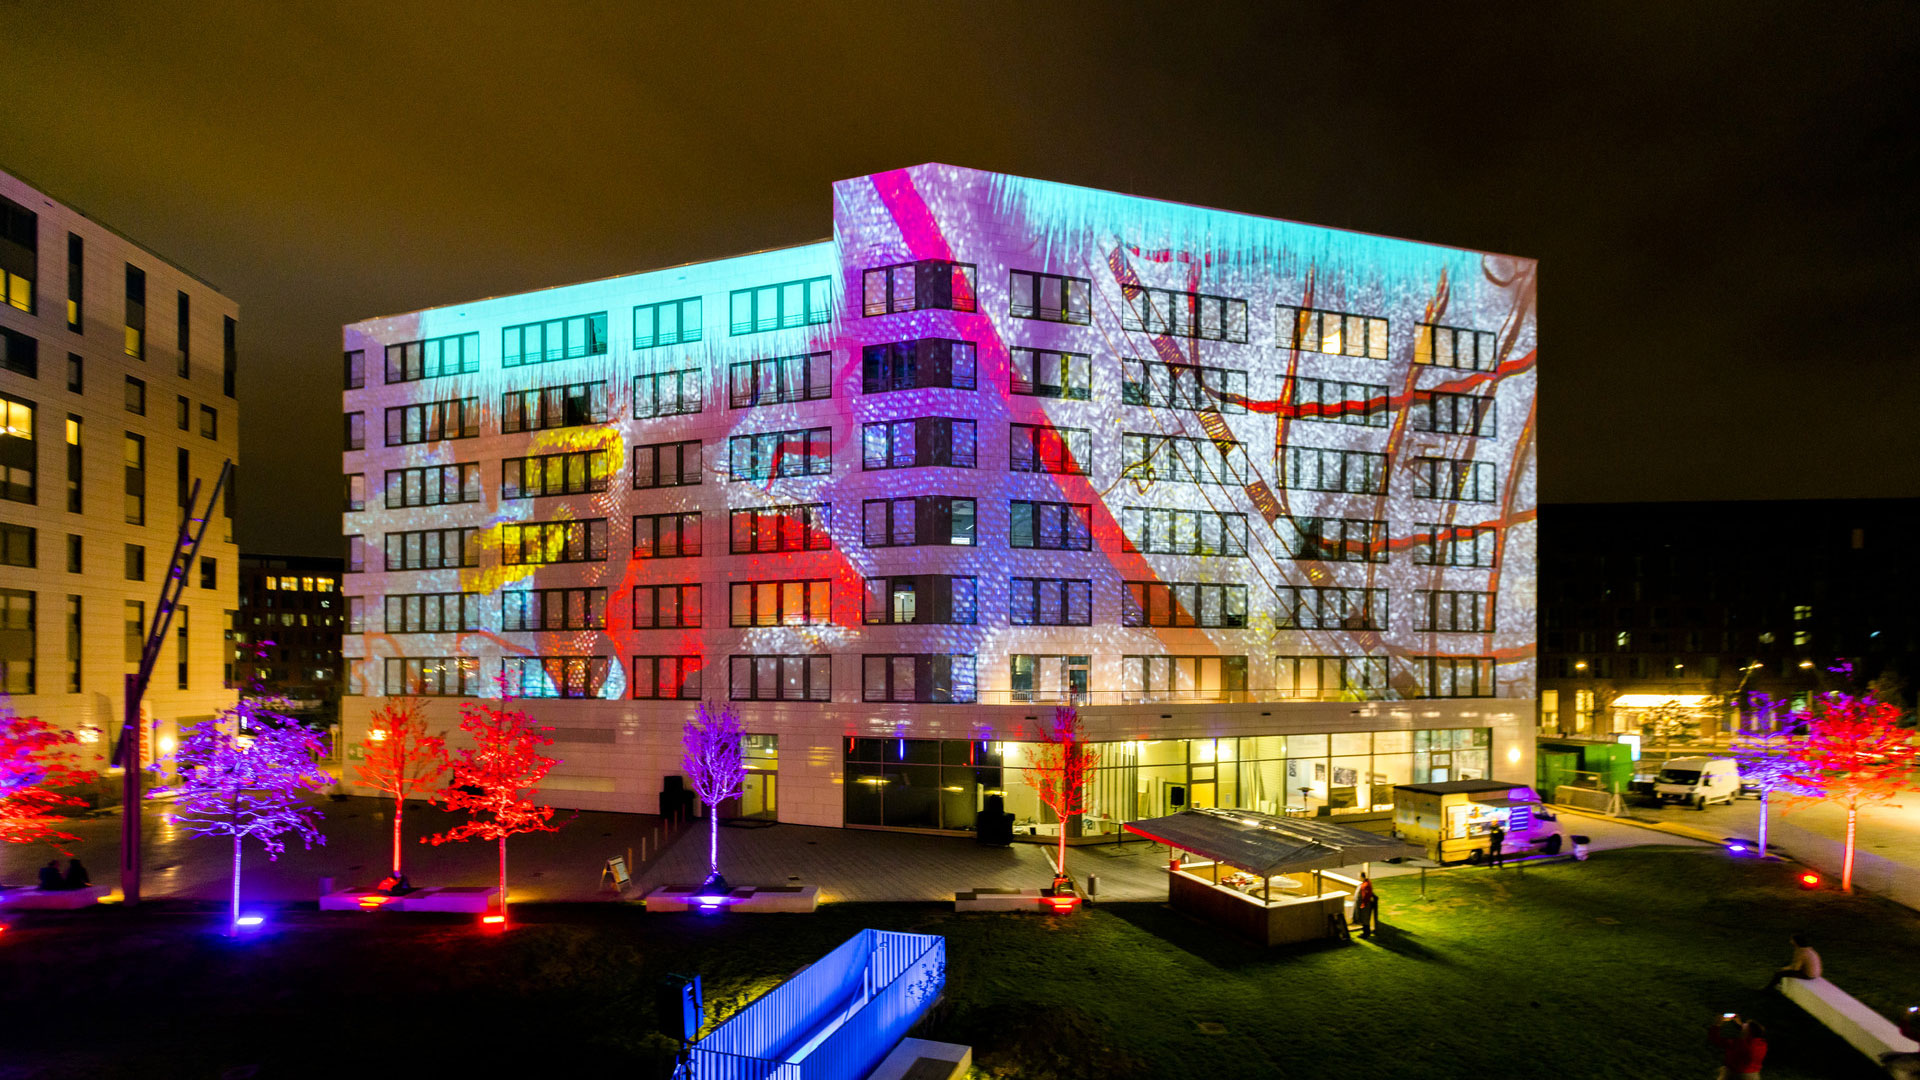 Artistic video mapping for the opening of the “Intelligent Quarters” in Hamburg’s HafenCity.